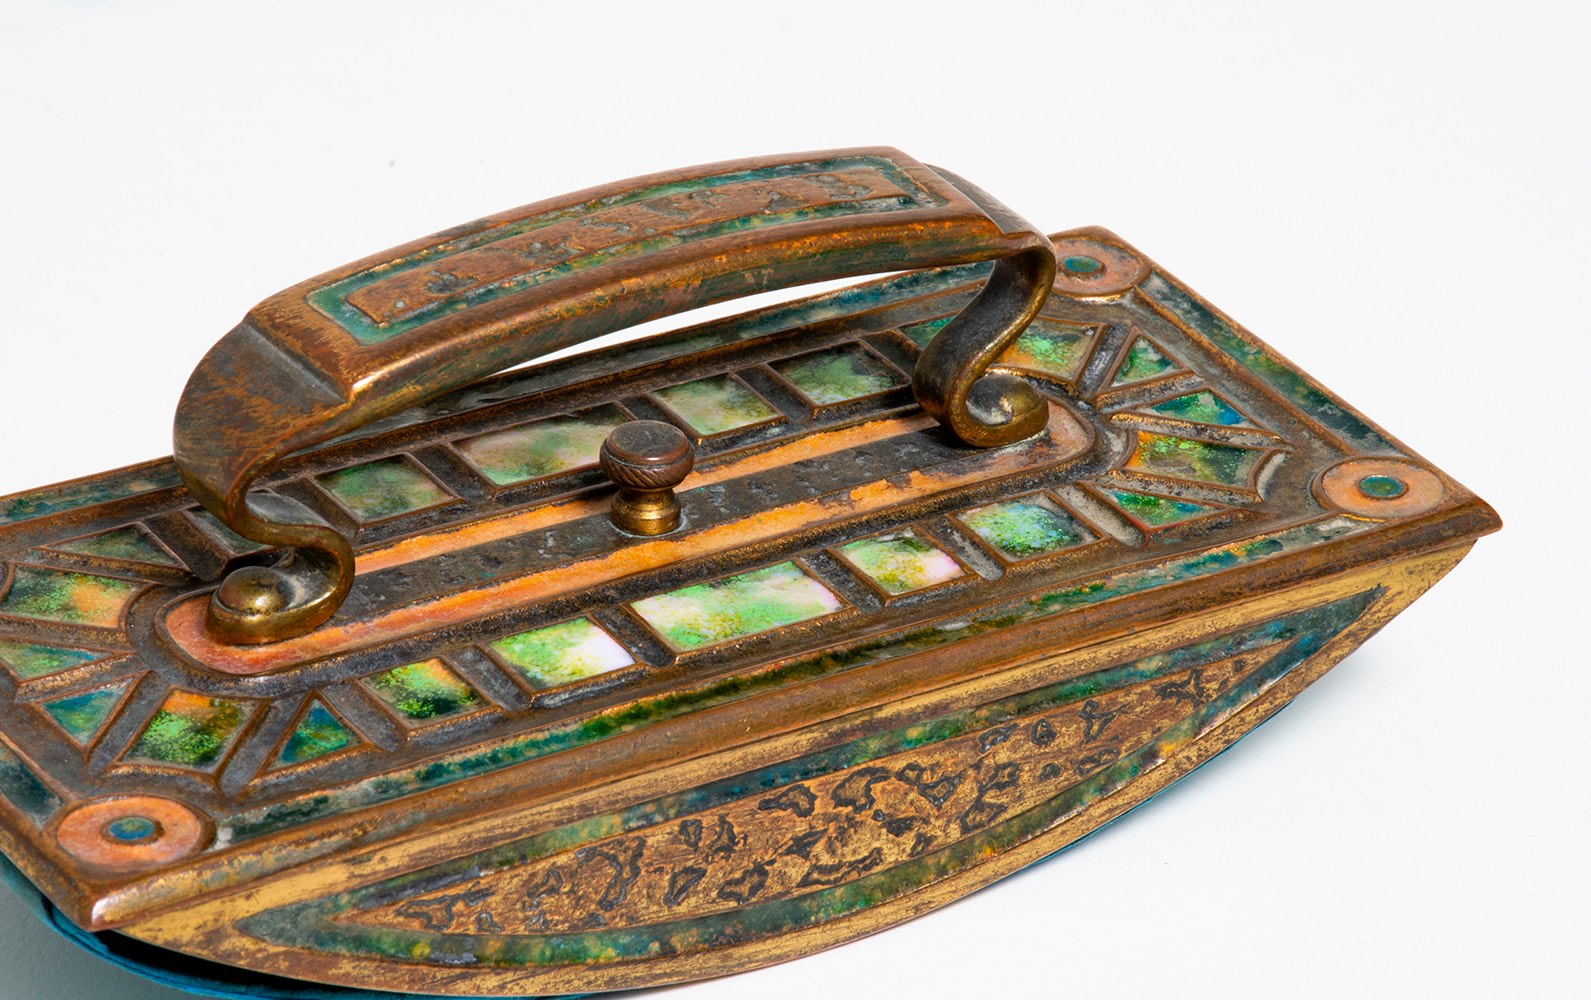 a gilt bronze &quot;rocker blotter&quot; a device used to blot excess ink, the handle and flat planes of the gilt bronze piece with inset enamel in square recesses in shades of green